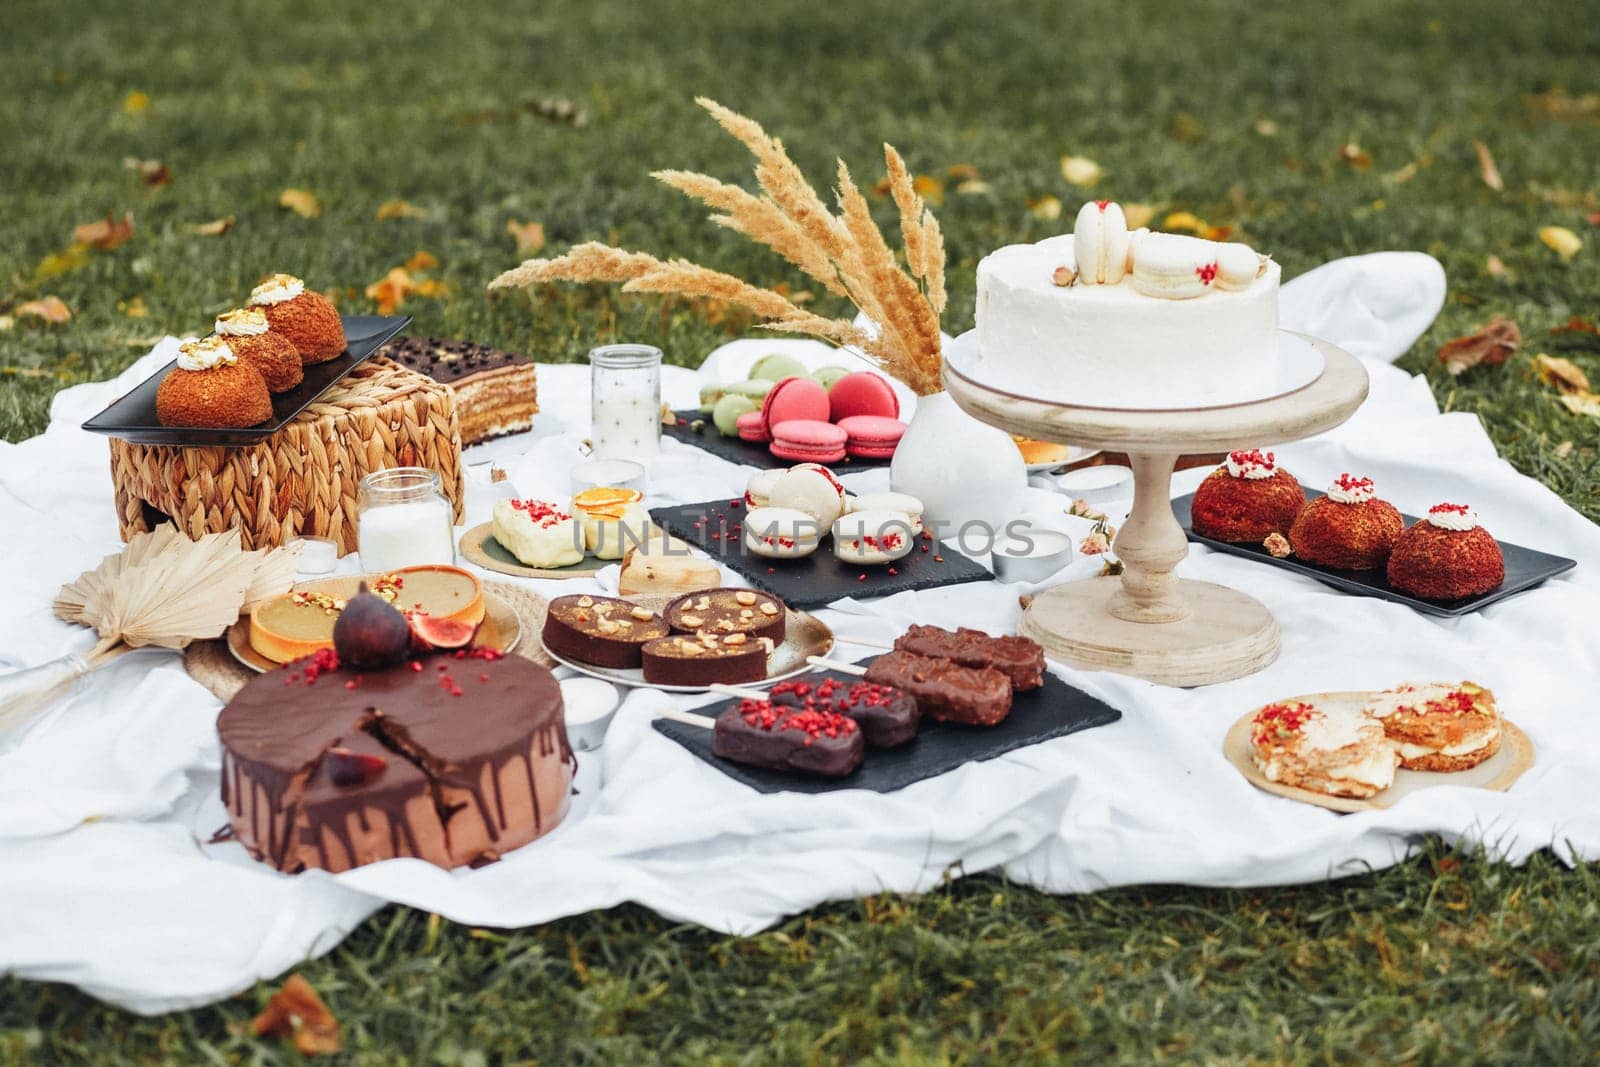 Sweet Indulgence: Array of Desserts on Picnic Blanket by Miron